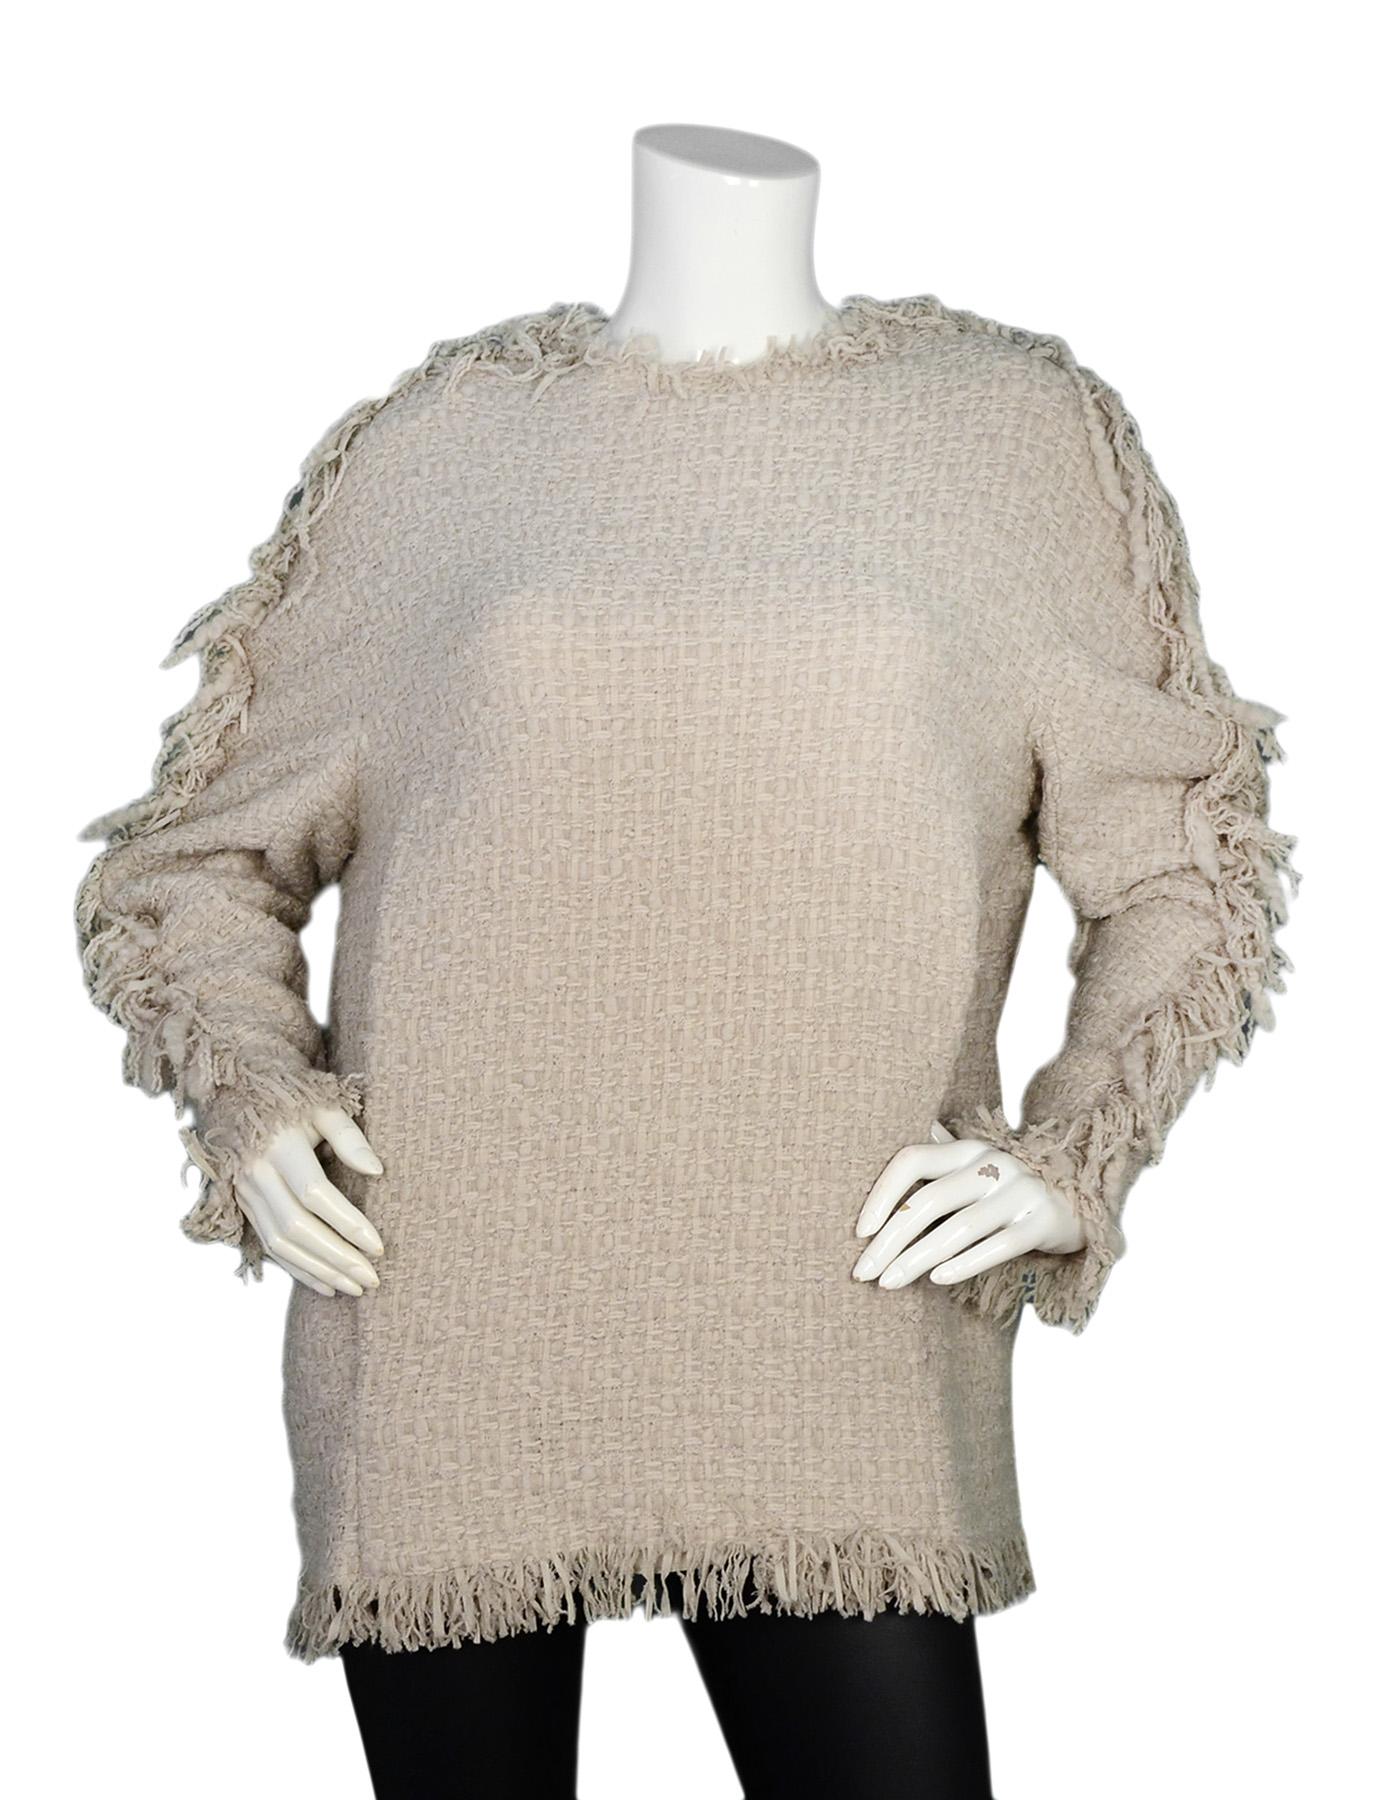 Lanvin NWT Beige Tweed Sweater w/ Fringe Trim sz 40 rt $2,000

Made In: France
Color: Beige
Materials: 68% wool, 29% polyamide, 3% polyester
Lining: 100% polyester
Opening/Closure: Back snap closures
Overall Condition: New with tags
Estimated